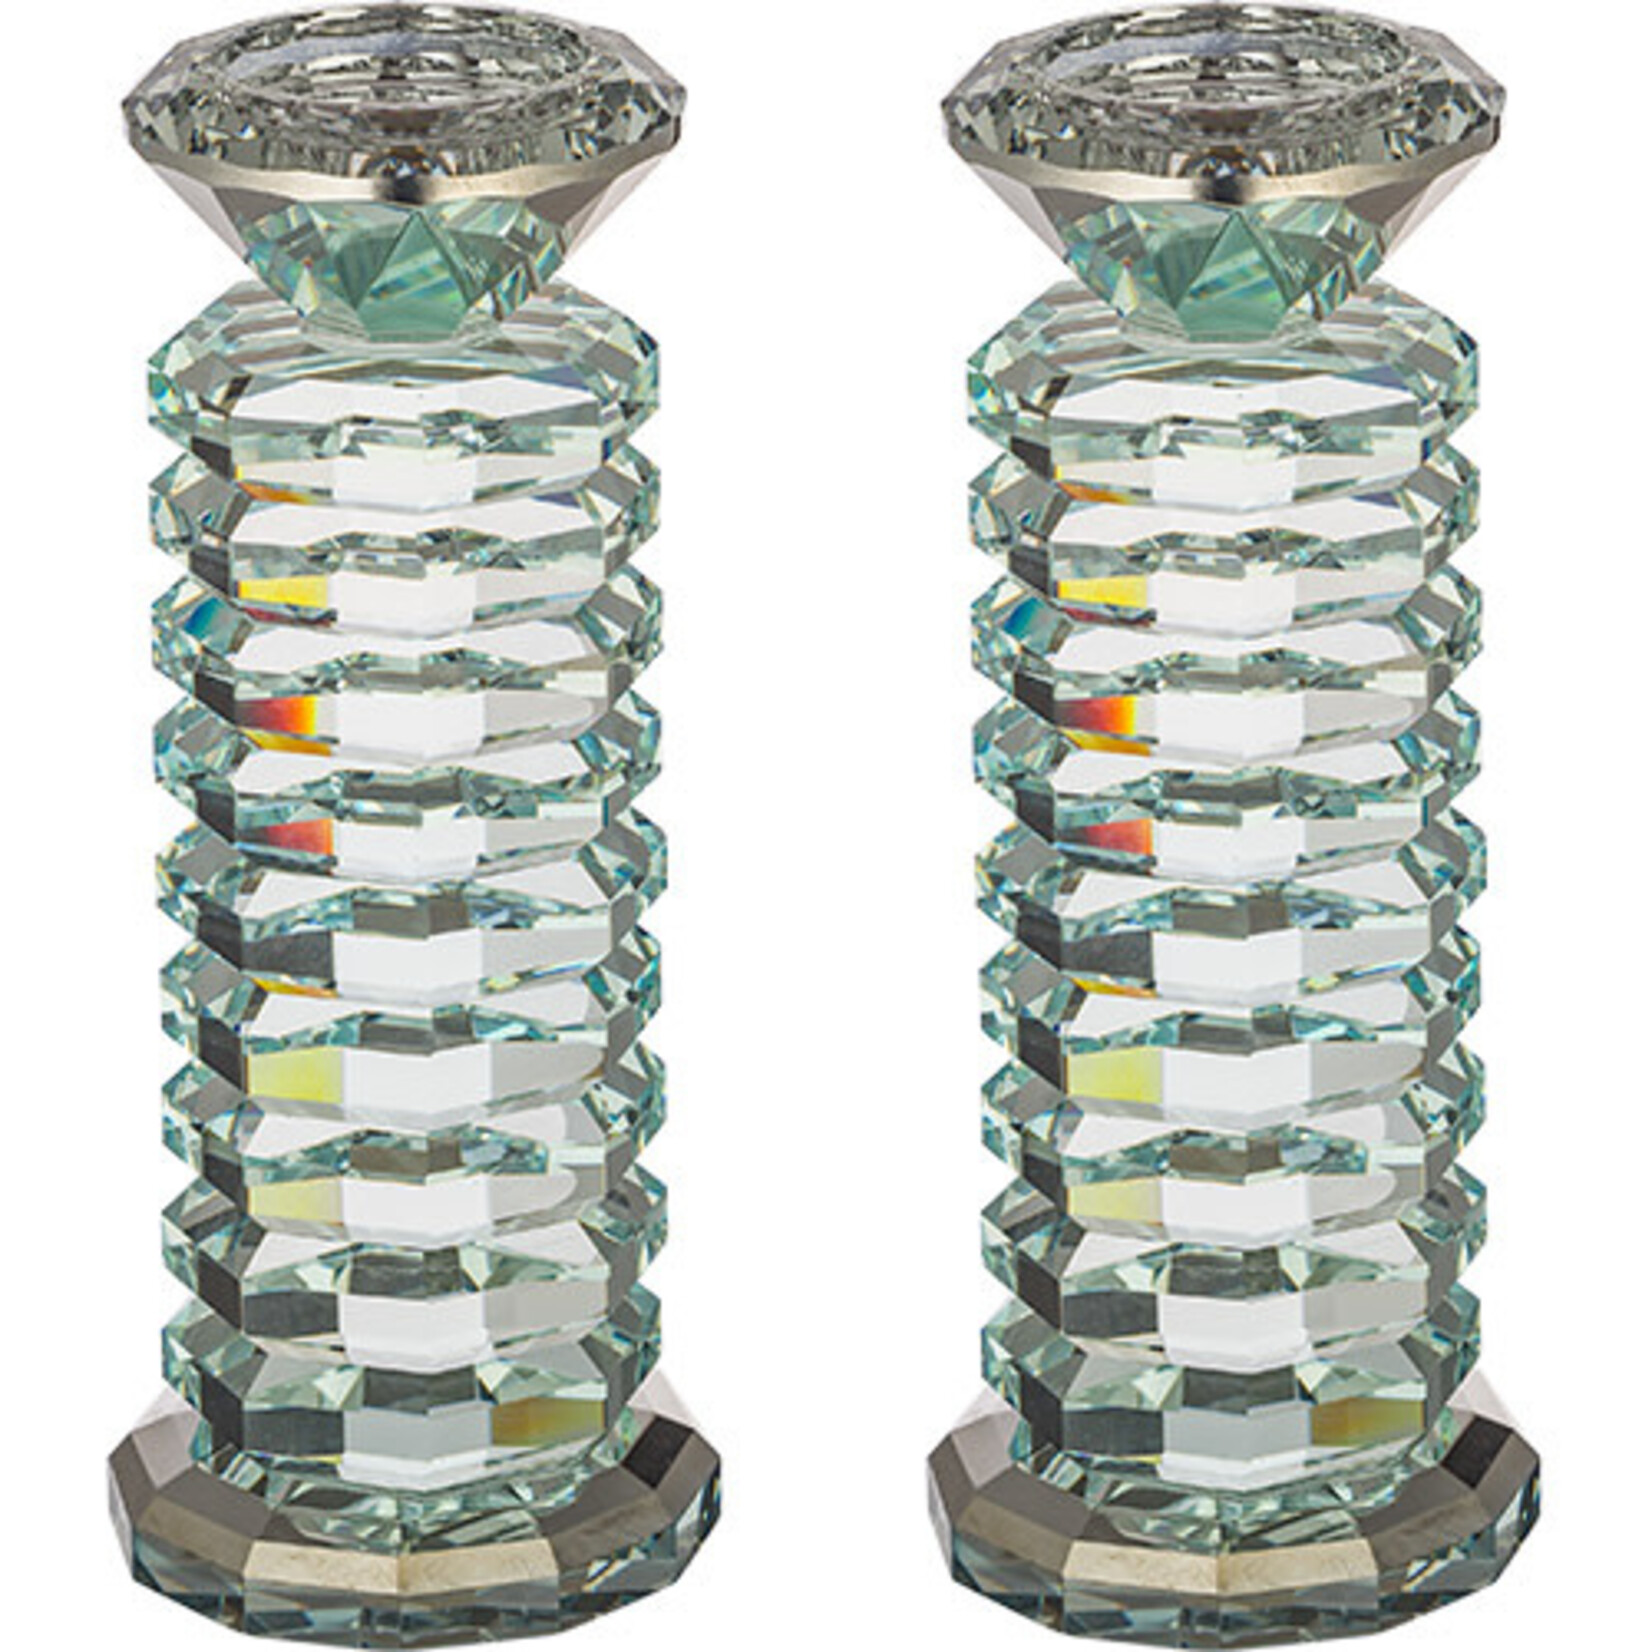 Clear Glass Stacked Candlesticks